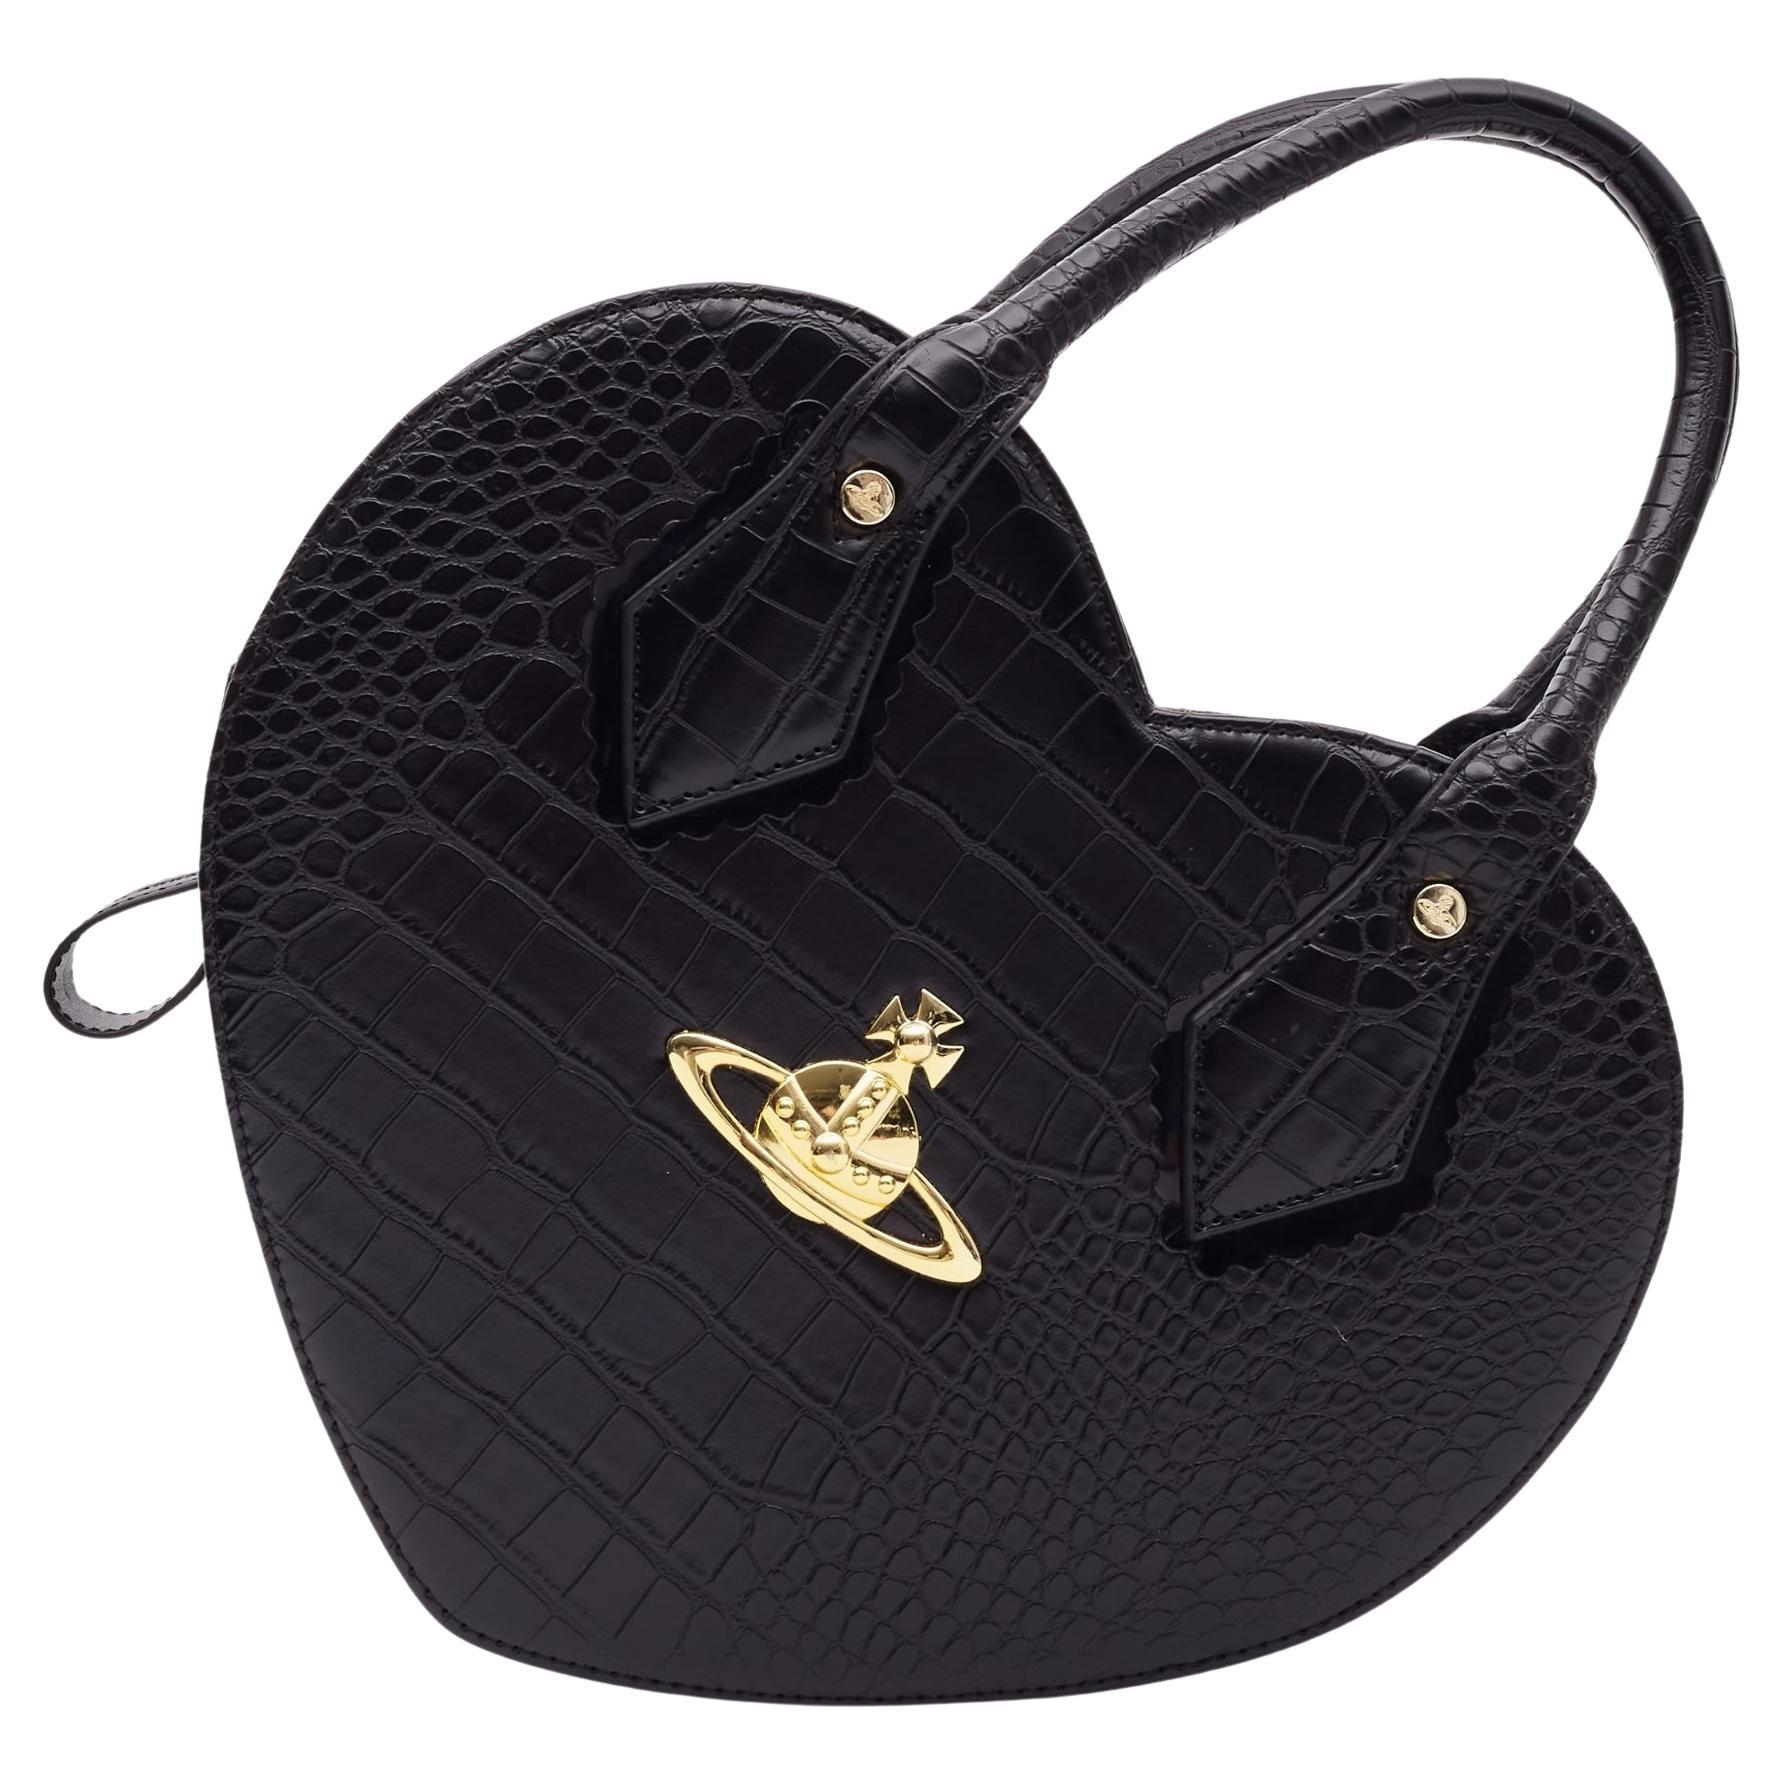 Are Vivienne Westwood bags genuine leather?